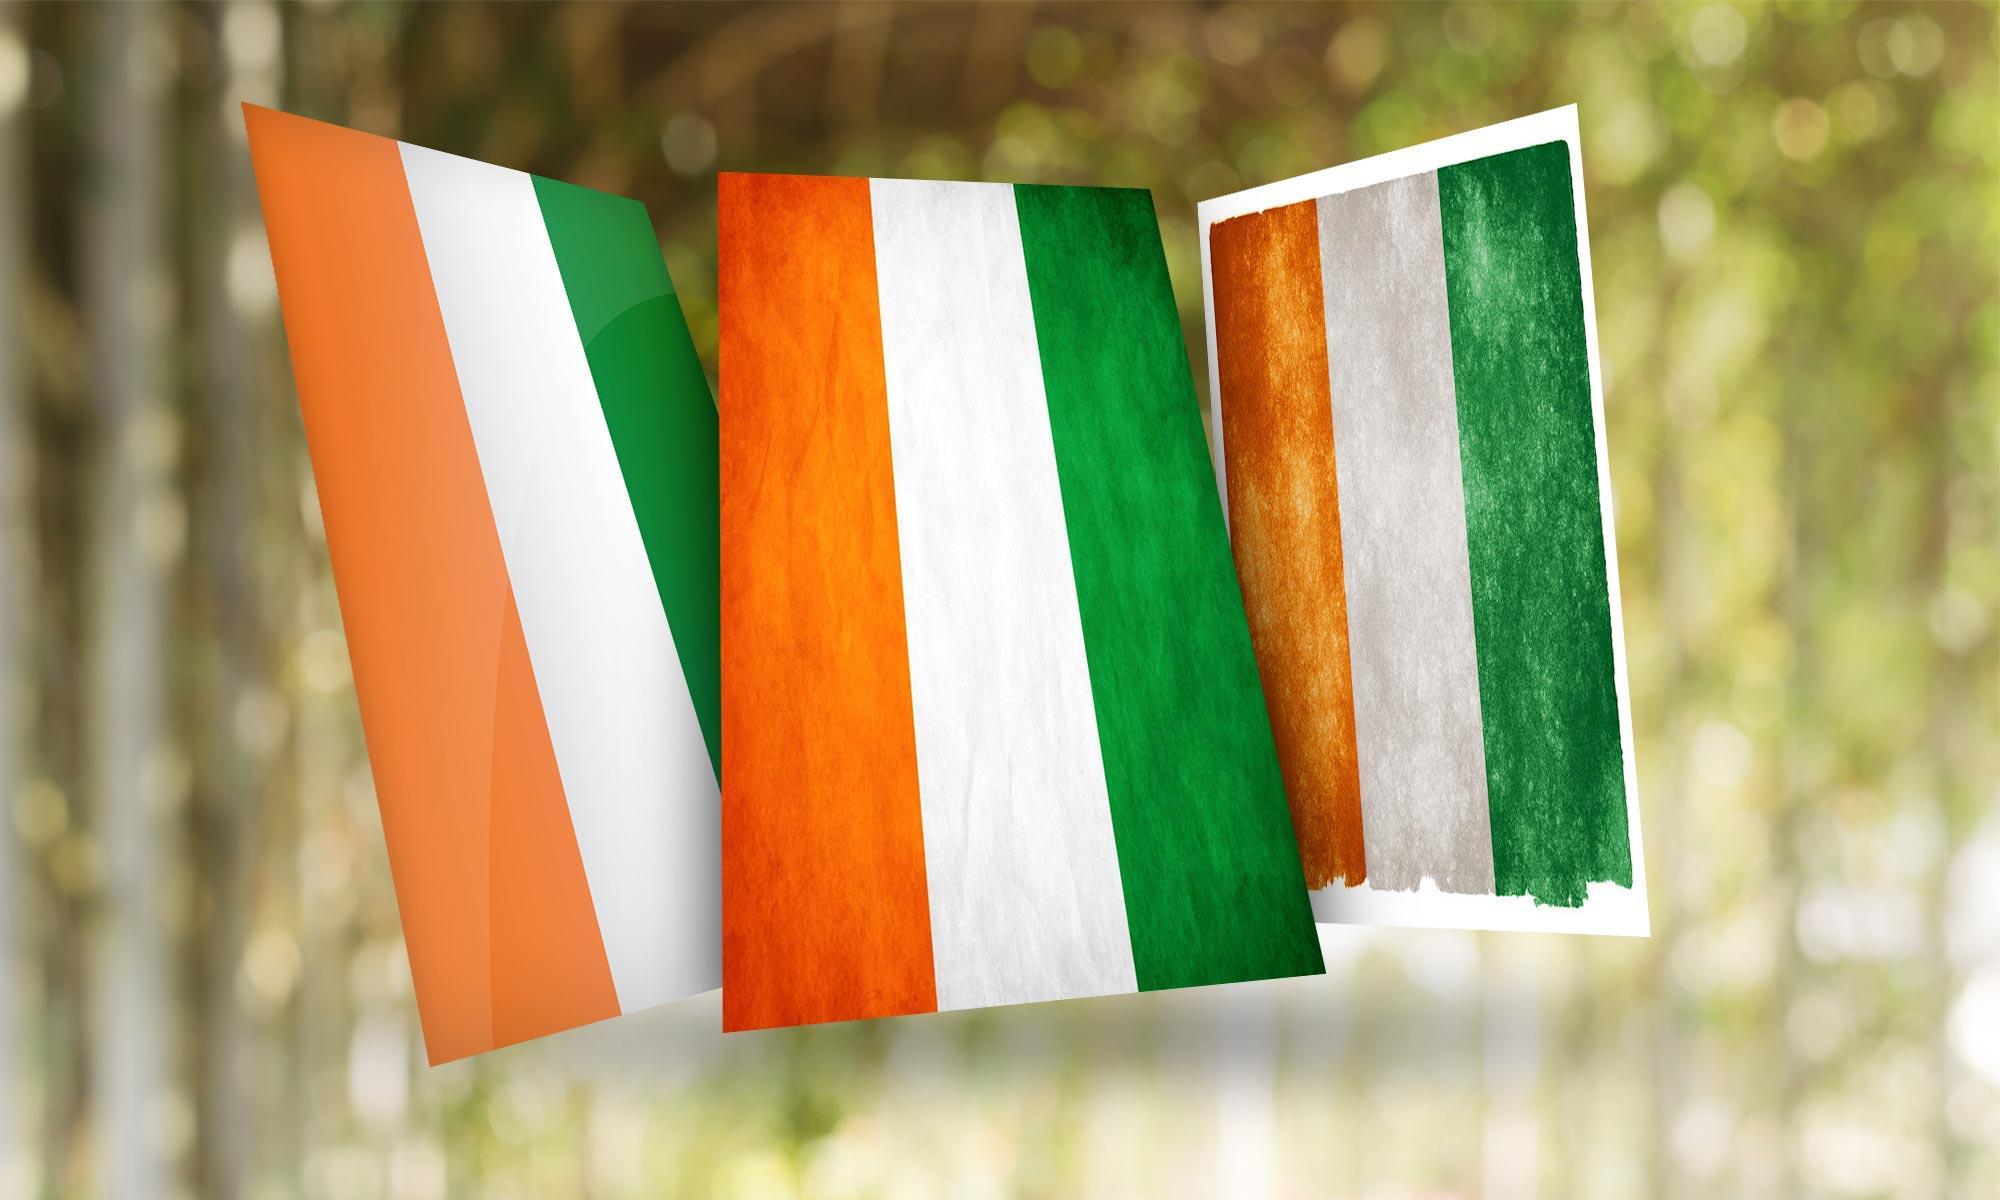 Ivory Coast Flag Wallpaper For Android Apk